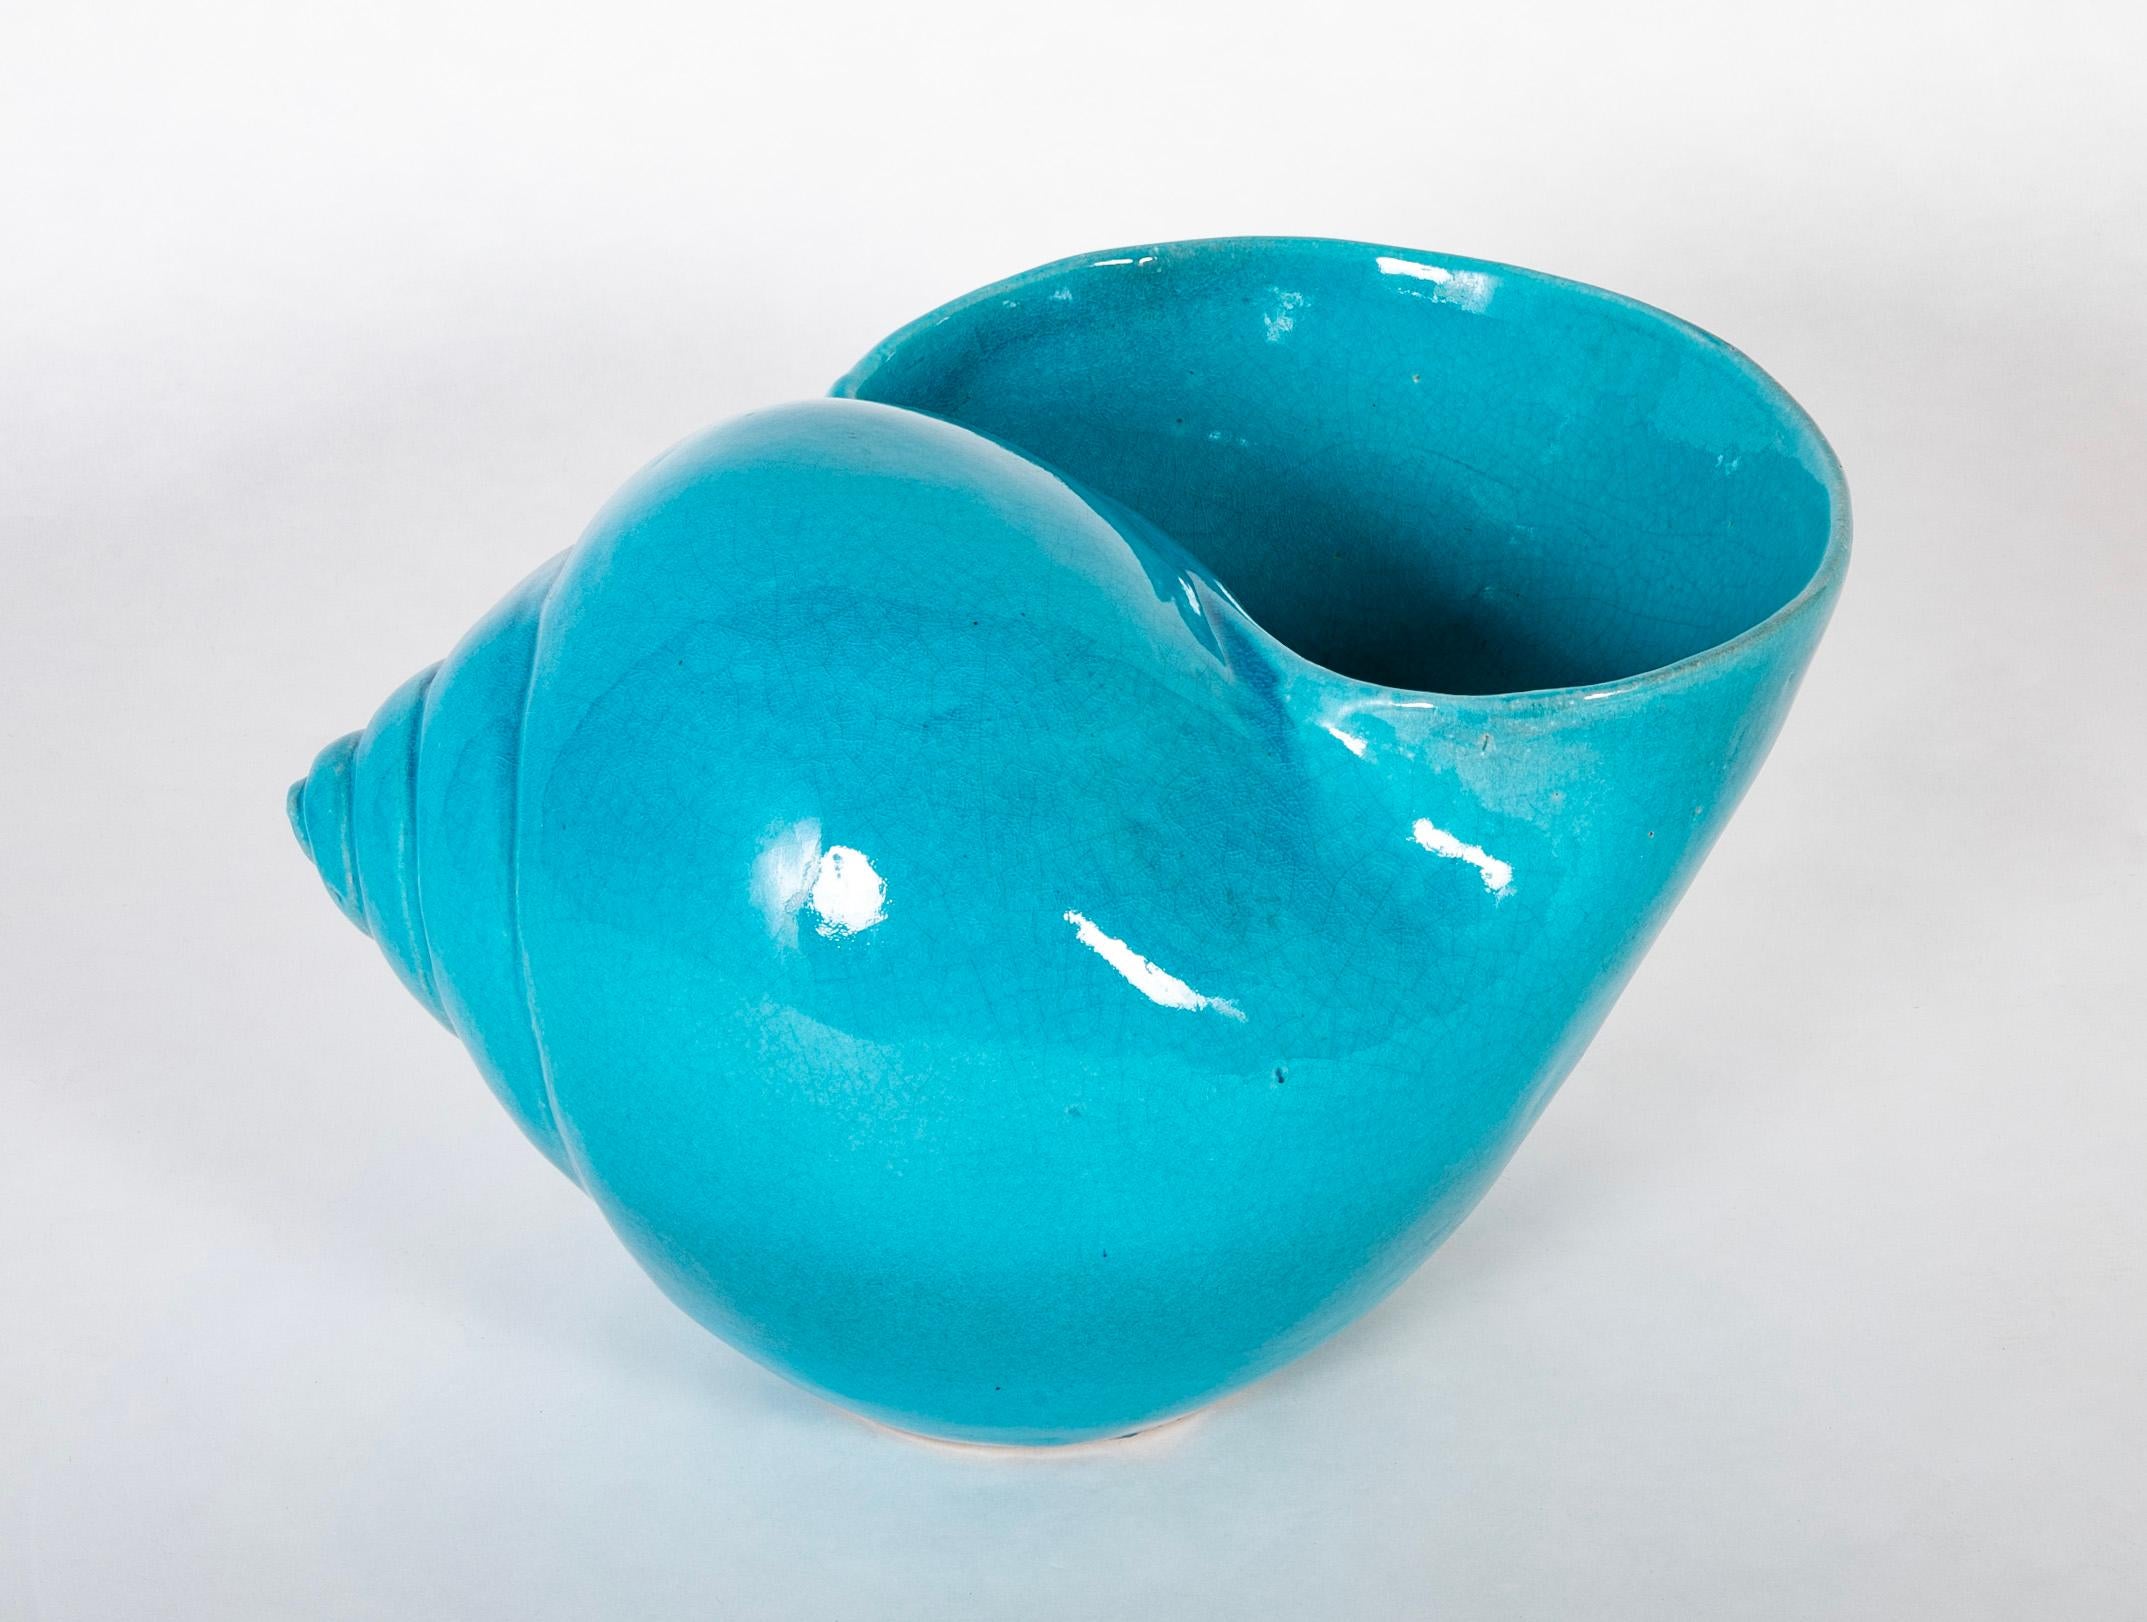 Turquoise Blue Glazed Sea Shell Vase Jardiniere Planter, Large Scale For Sale 9